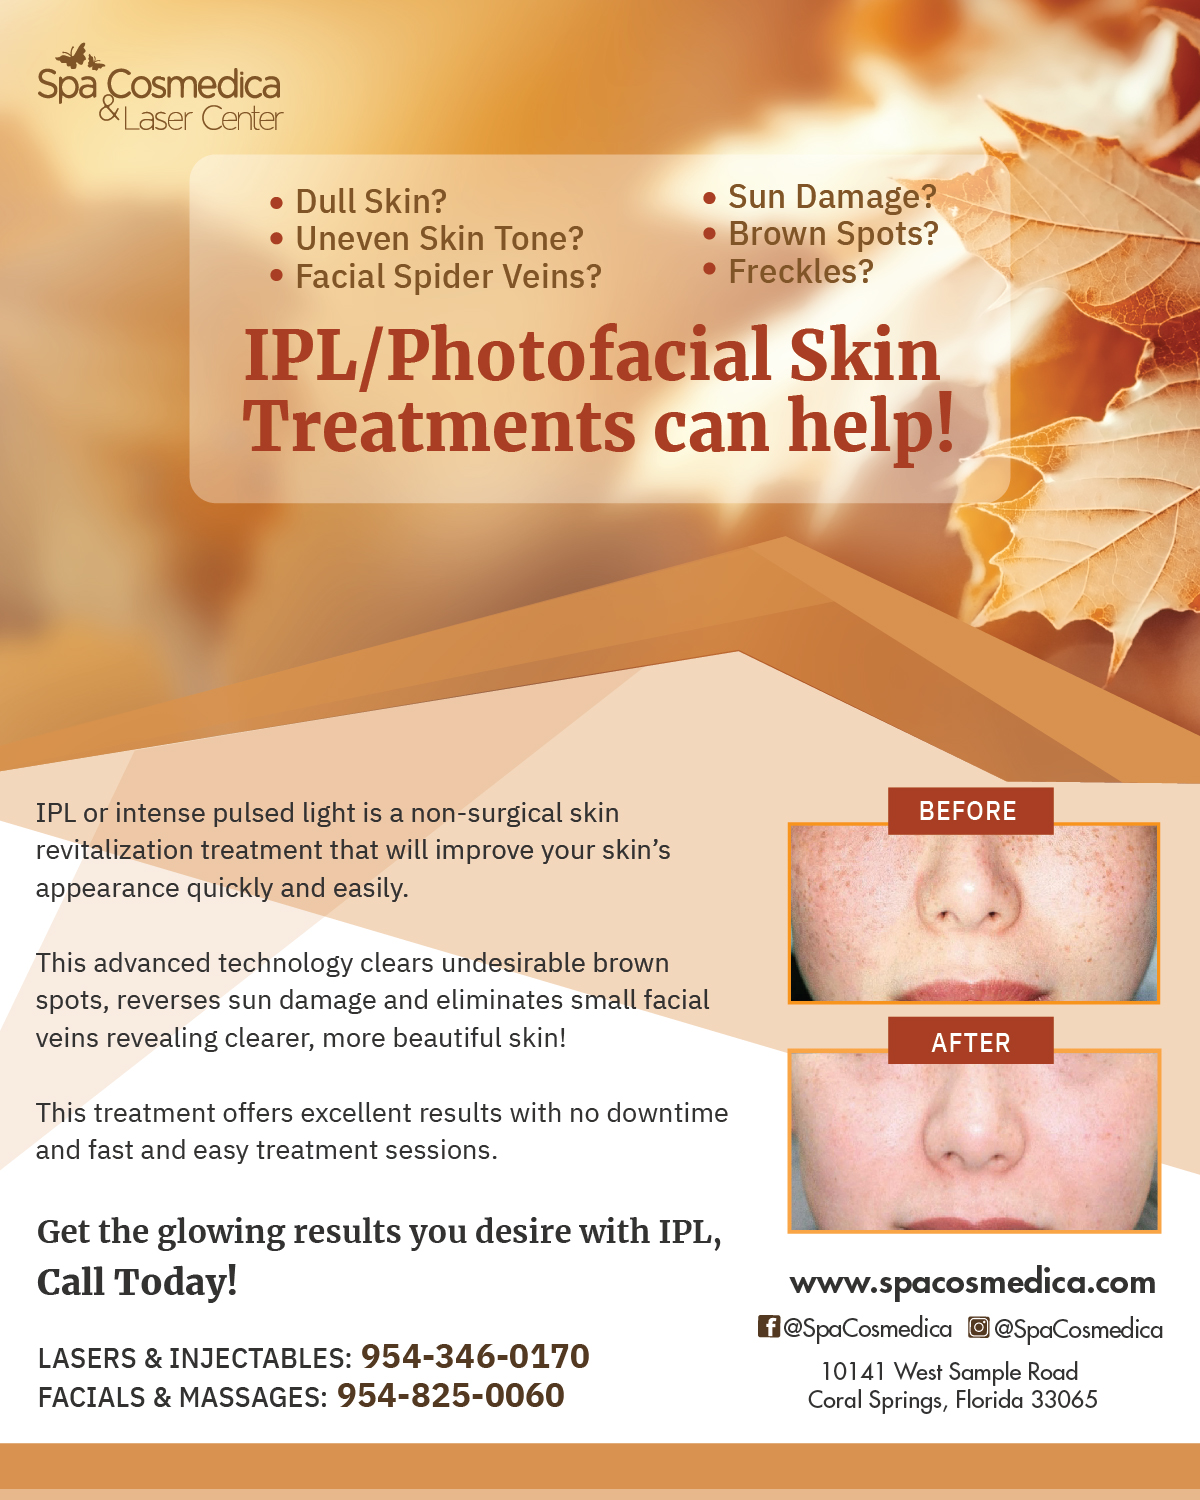 , See the Beautiful Skin Results with IPL!